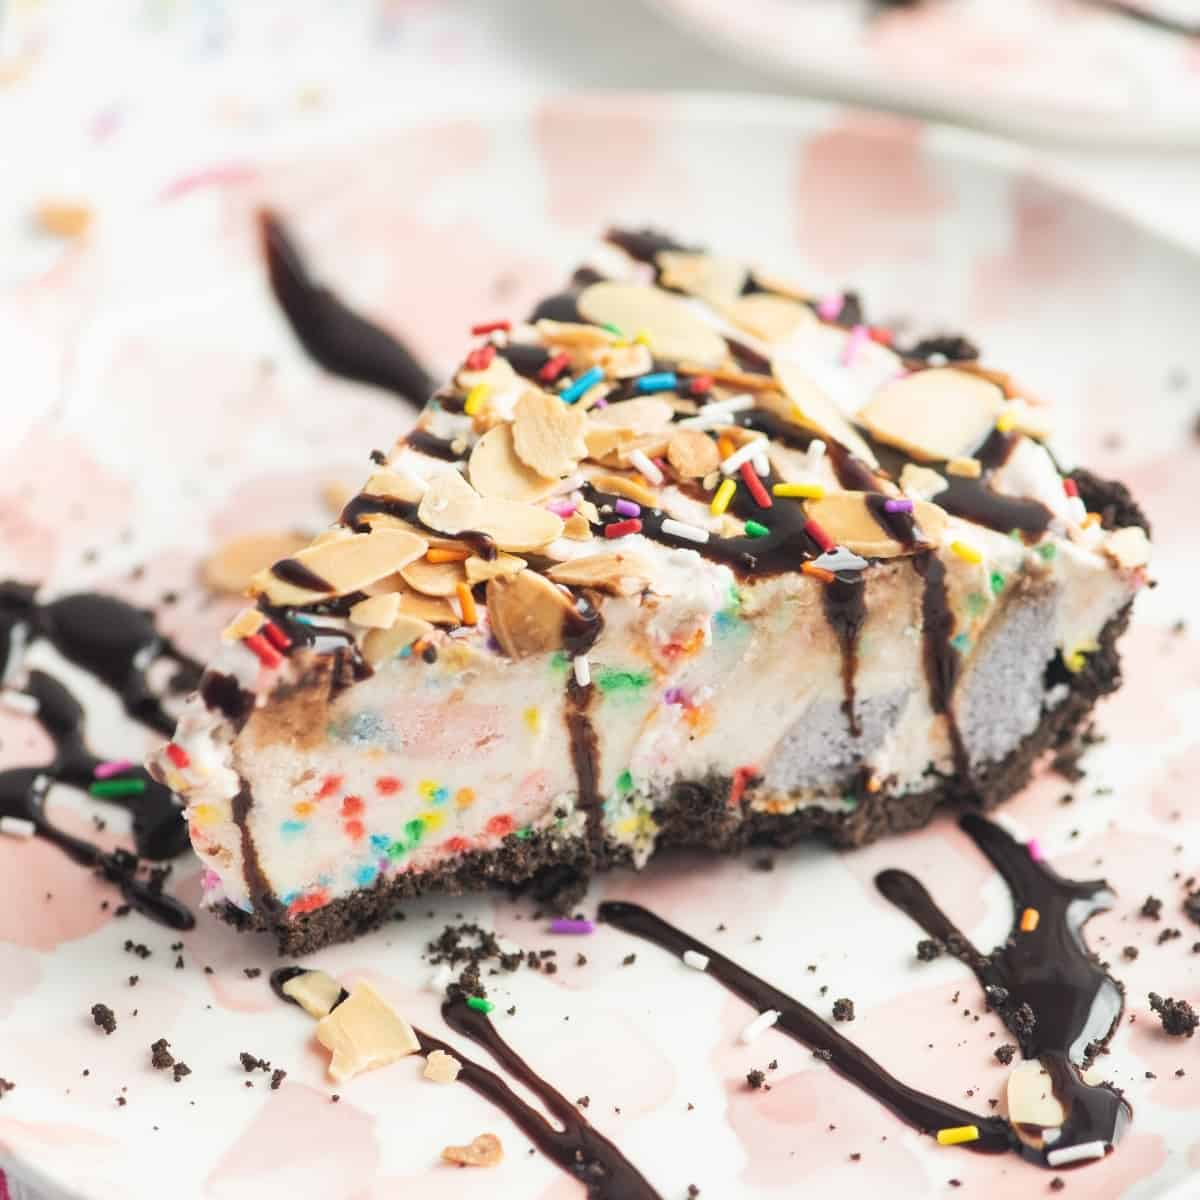 Ice cream pie topped with chocolate syrup, nuts, and sprinkles